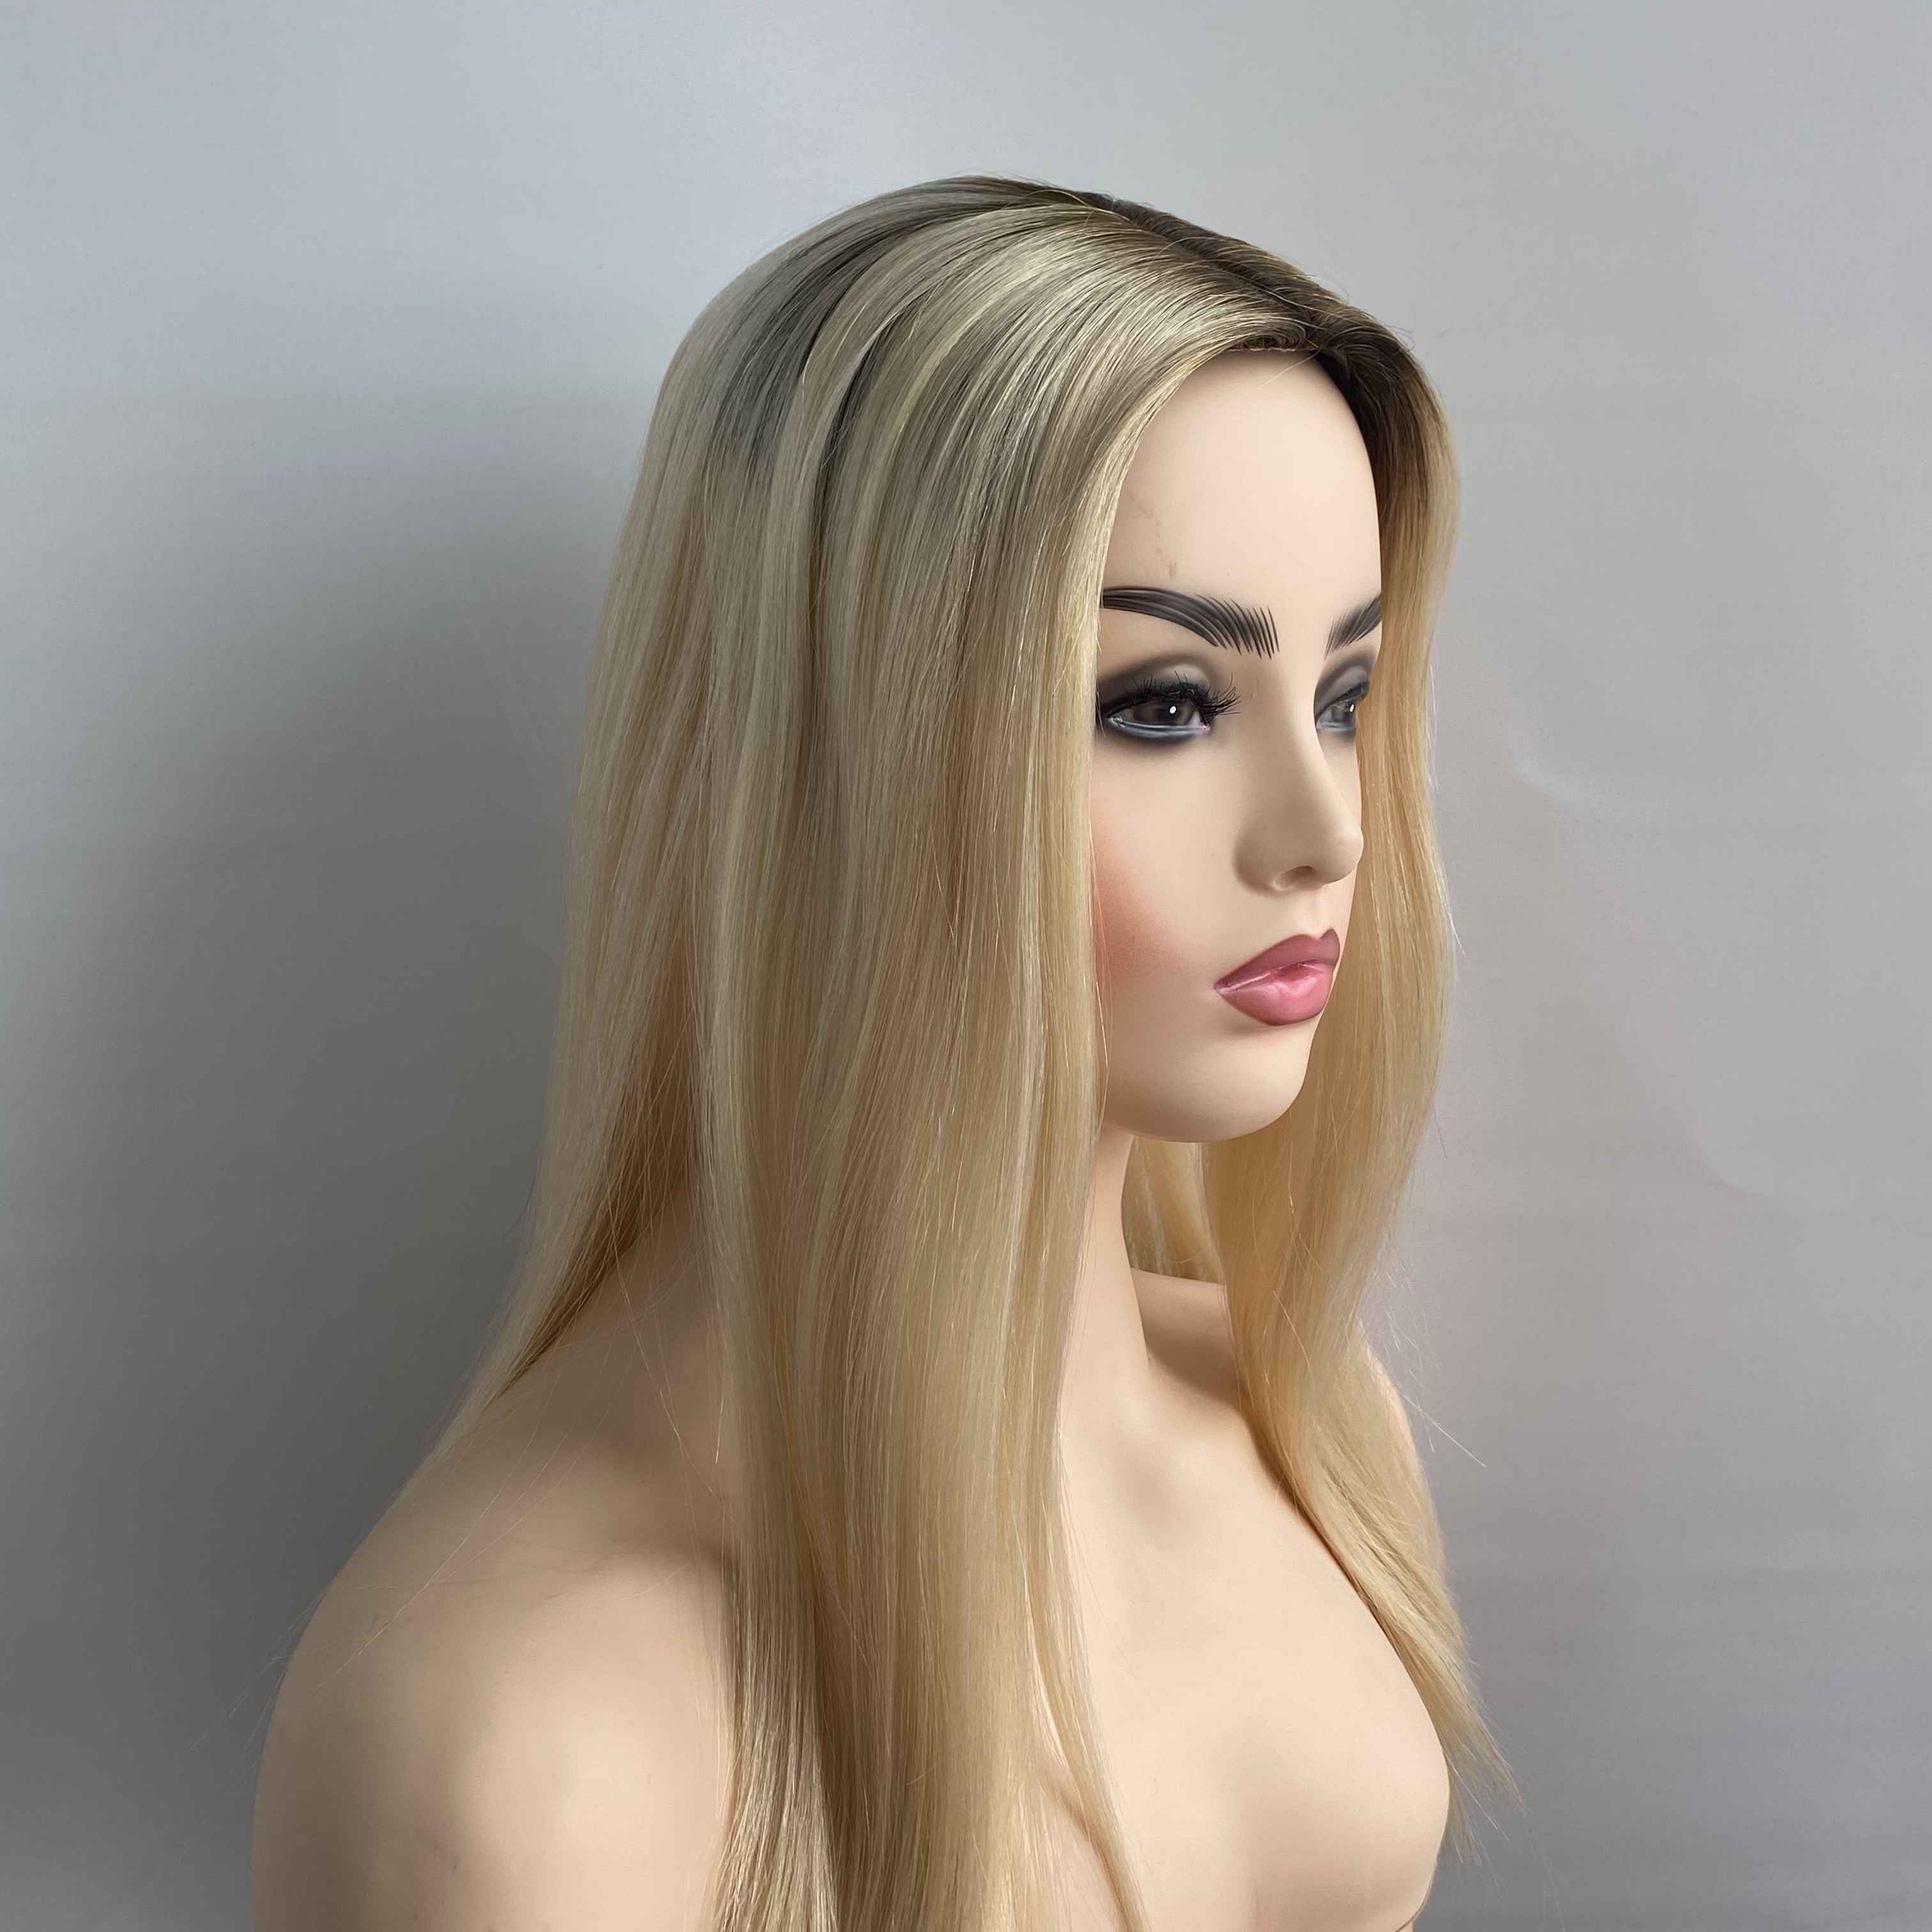 6*7" Hair Toppers with Silk Top,the Best Quality Vitgin Remy Huamn Hair Silk Top Hair Toppers